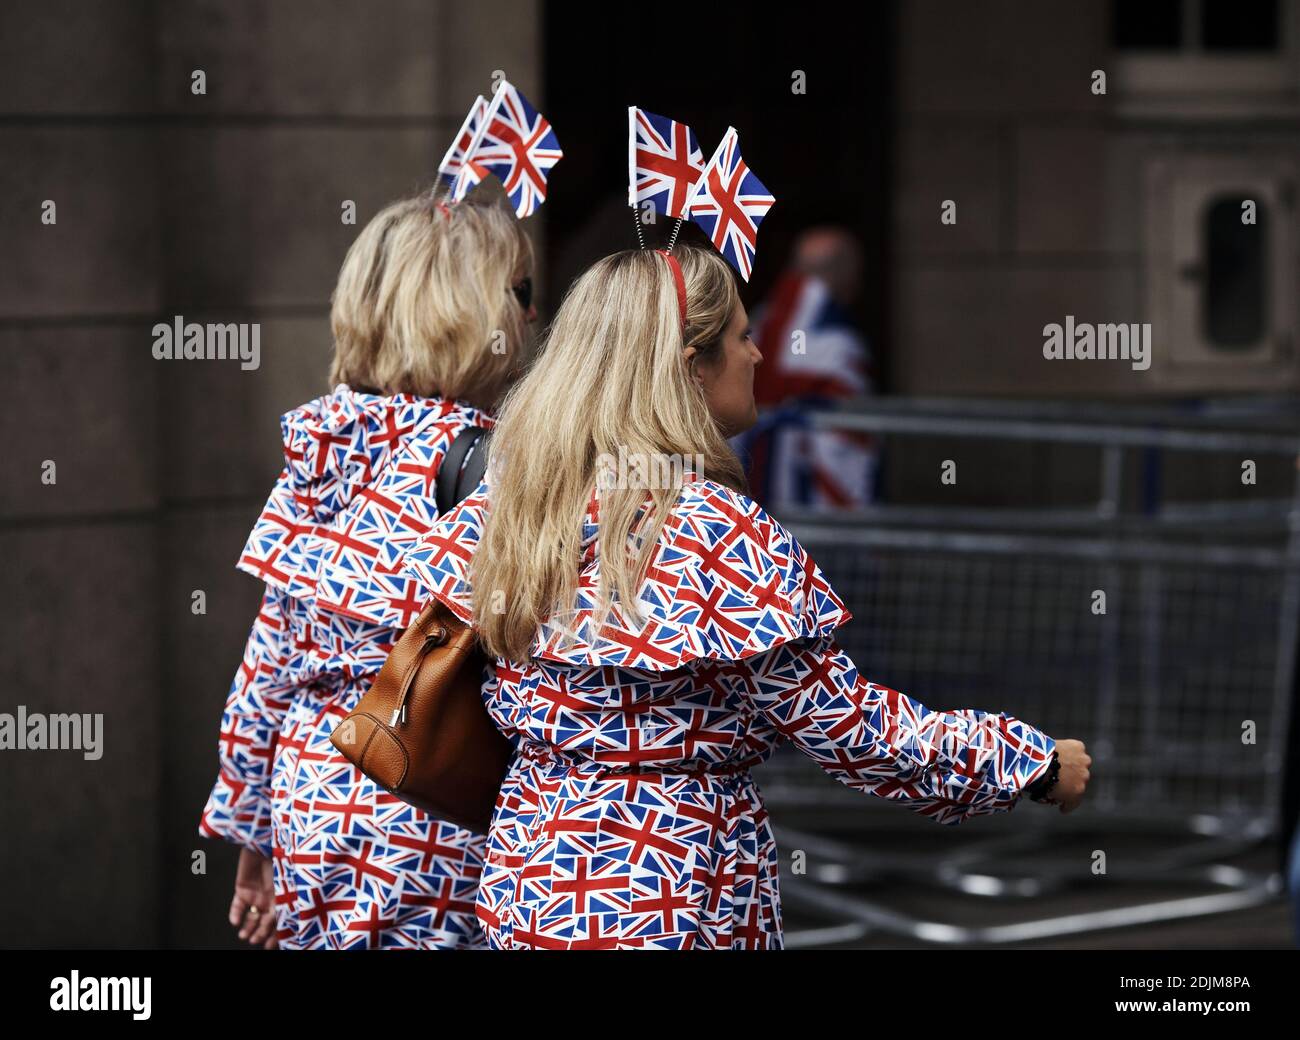 GREAT BRITAIN / England / London /womann wearing Union flag attire during the Diamond Jubilee Buckingham Palace Concert on June 4, 2012 in London, Stock Photo